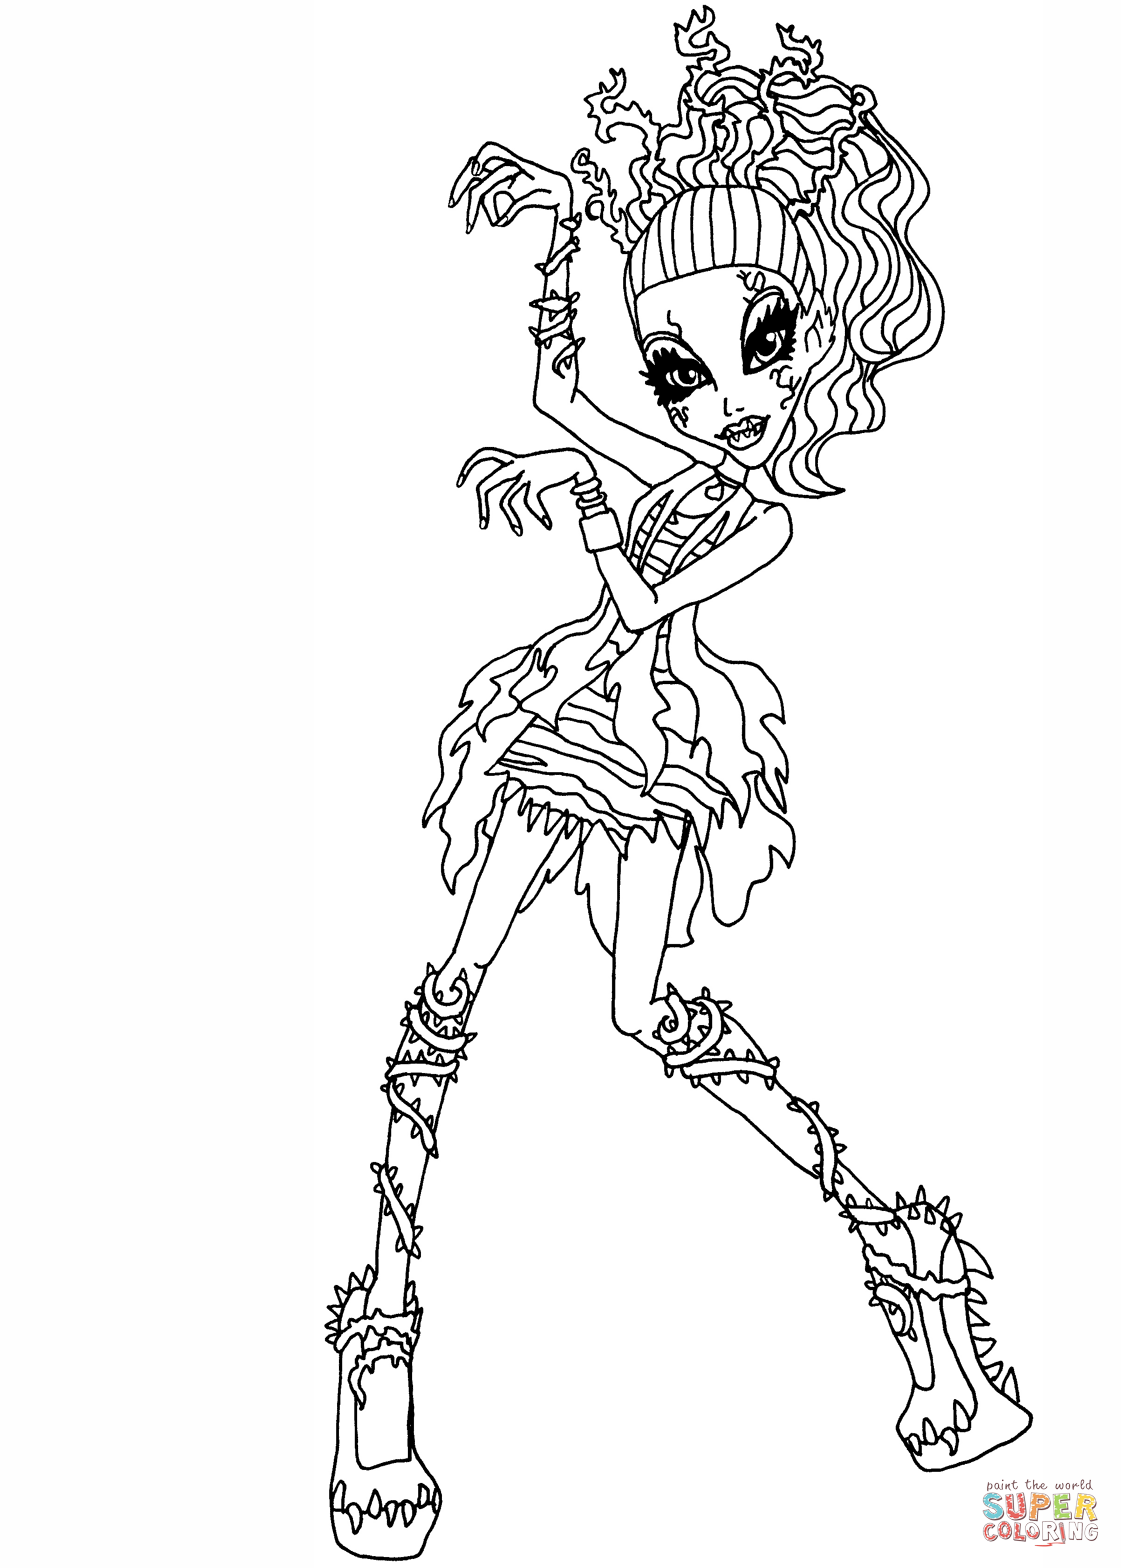 Zombie dance venus coloring page free printable coloring pages